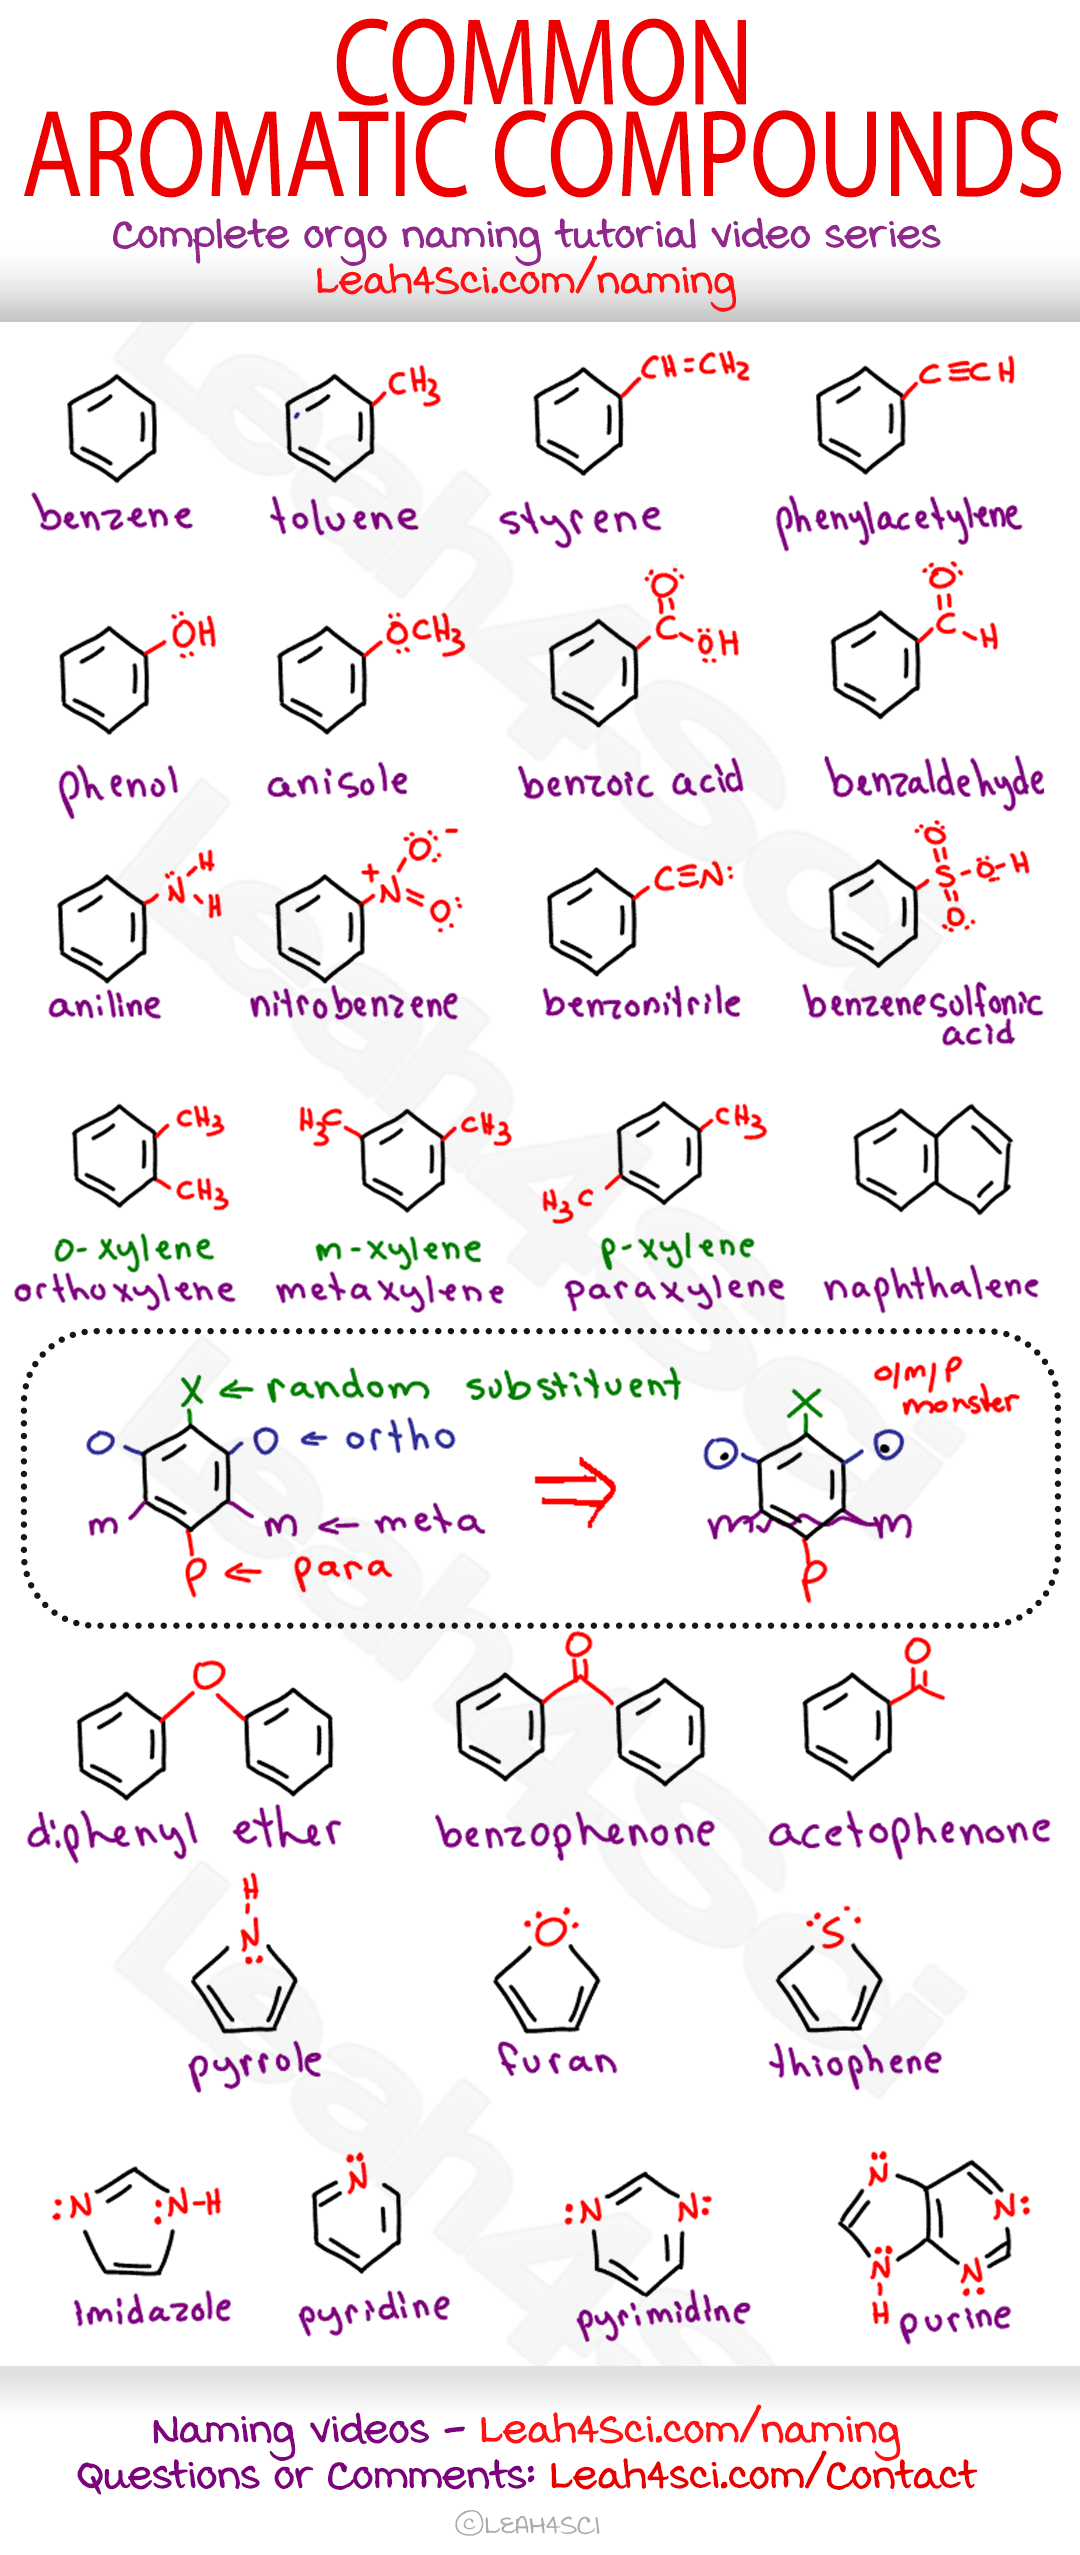 aromatic-compounds-study-guide-cheat-sheet-mcat-and-organic-chemistry